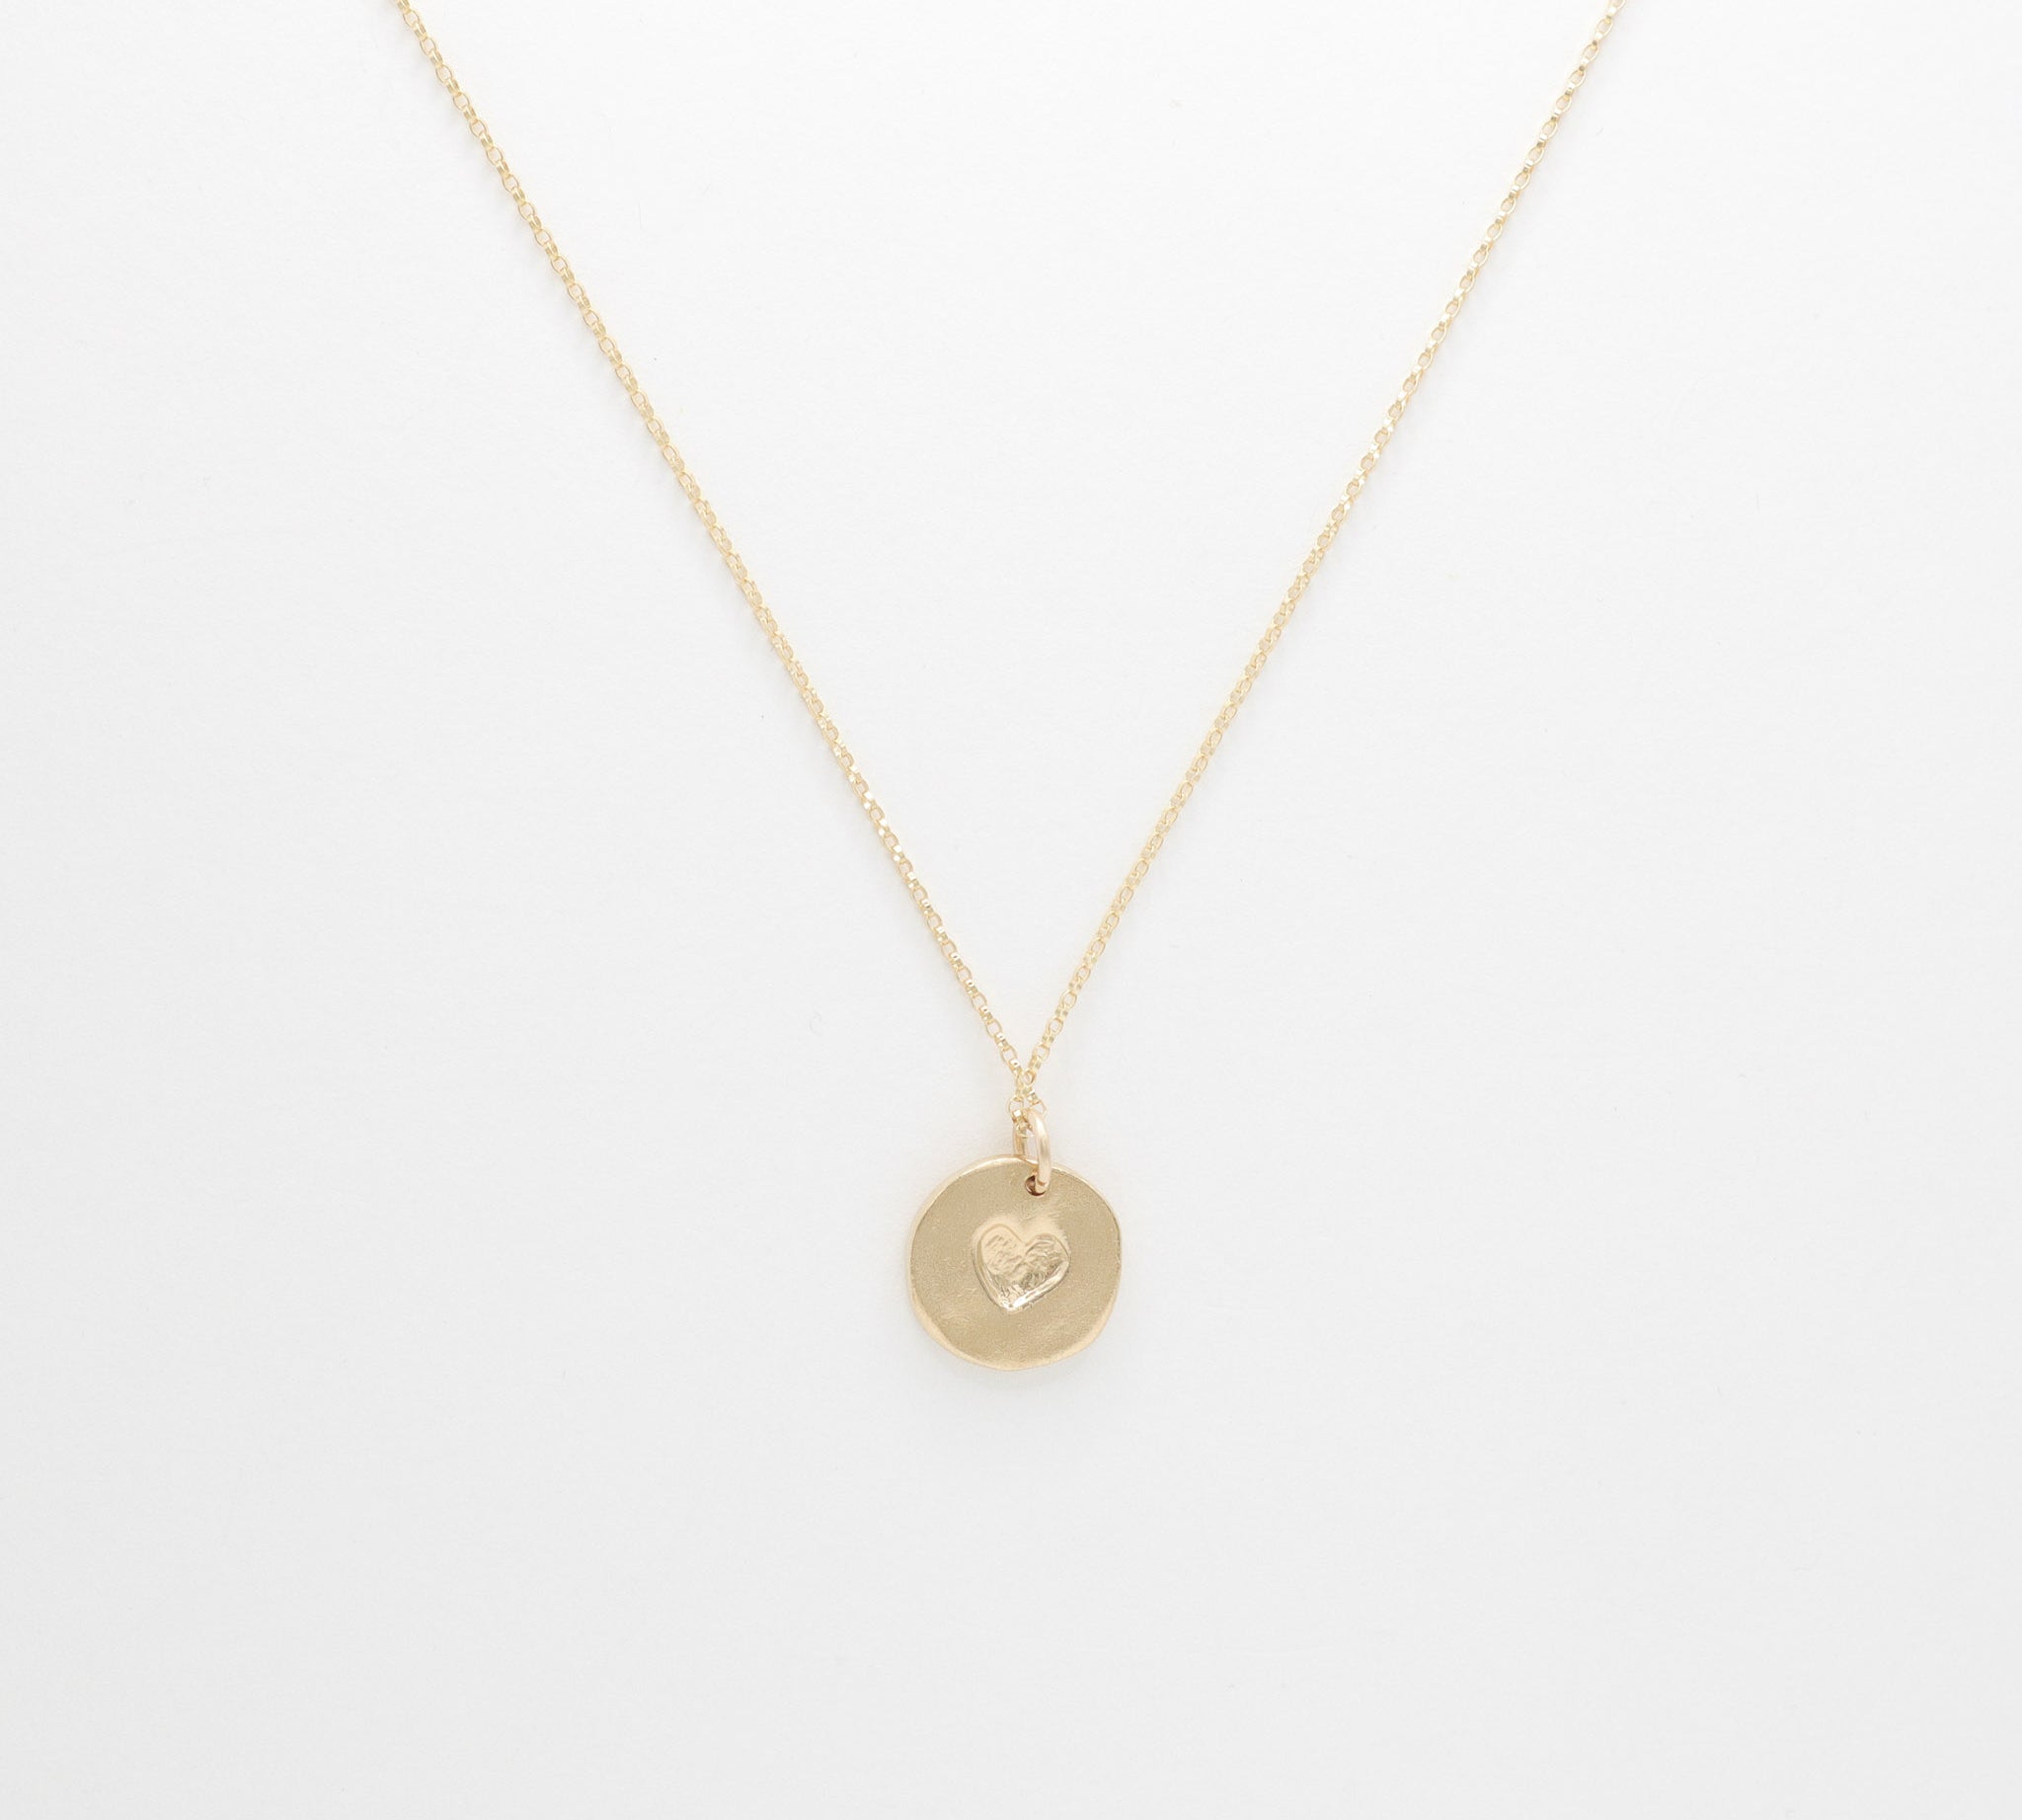 Gold Love Pendant Necklace, product image showing reverse side of charm